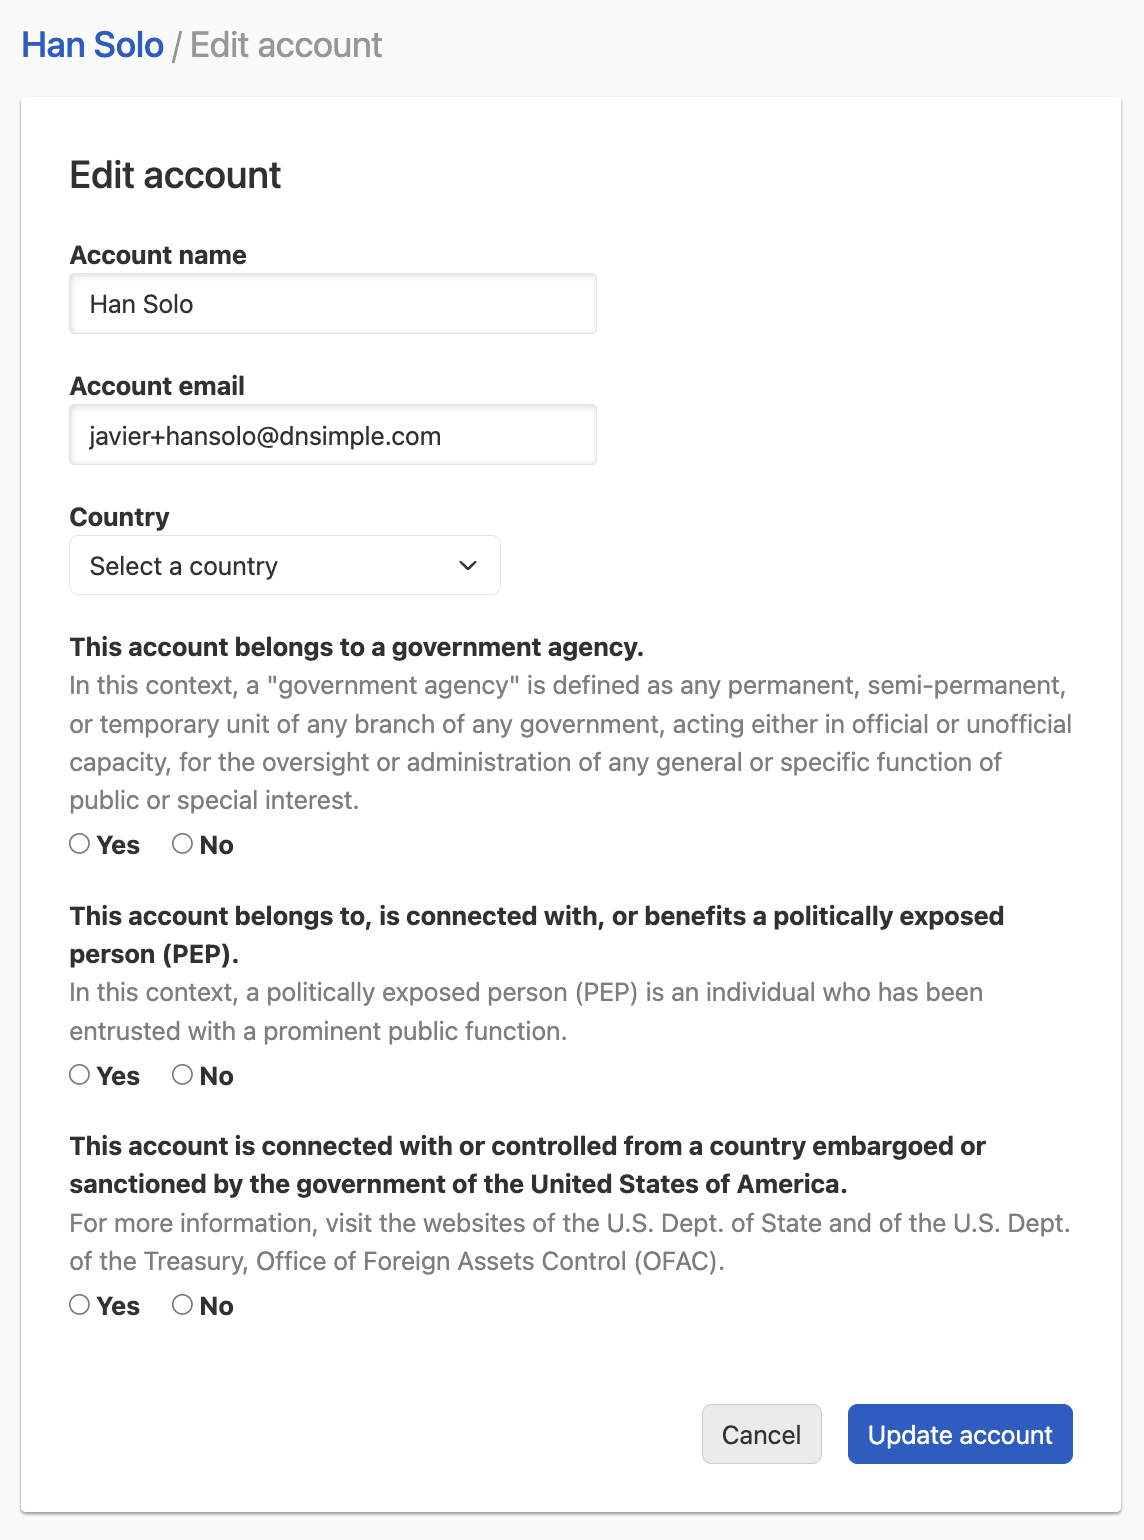 Account information form